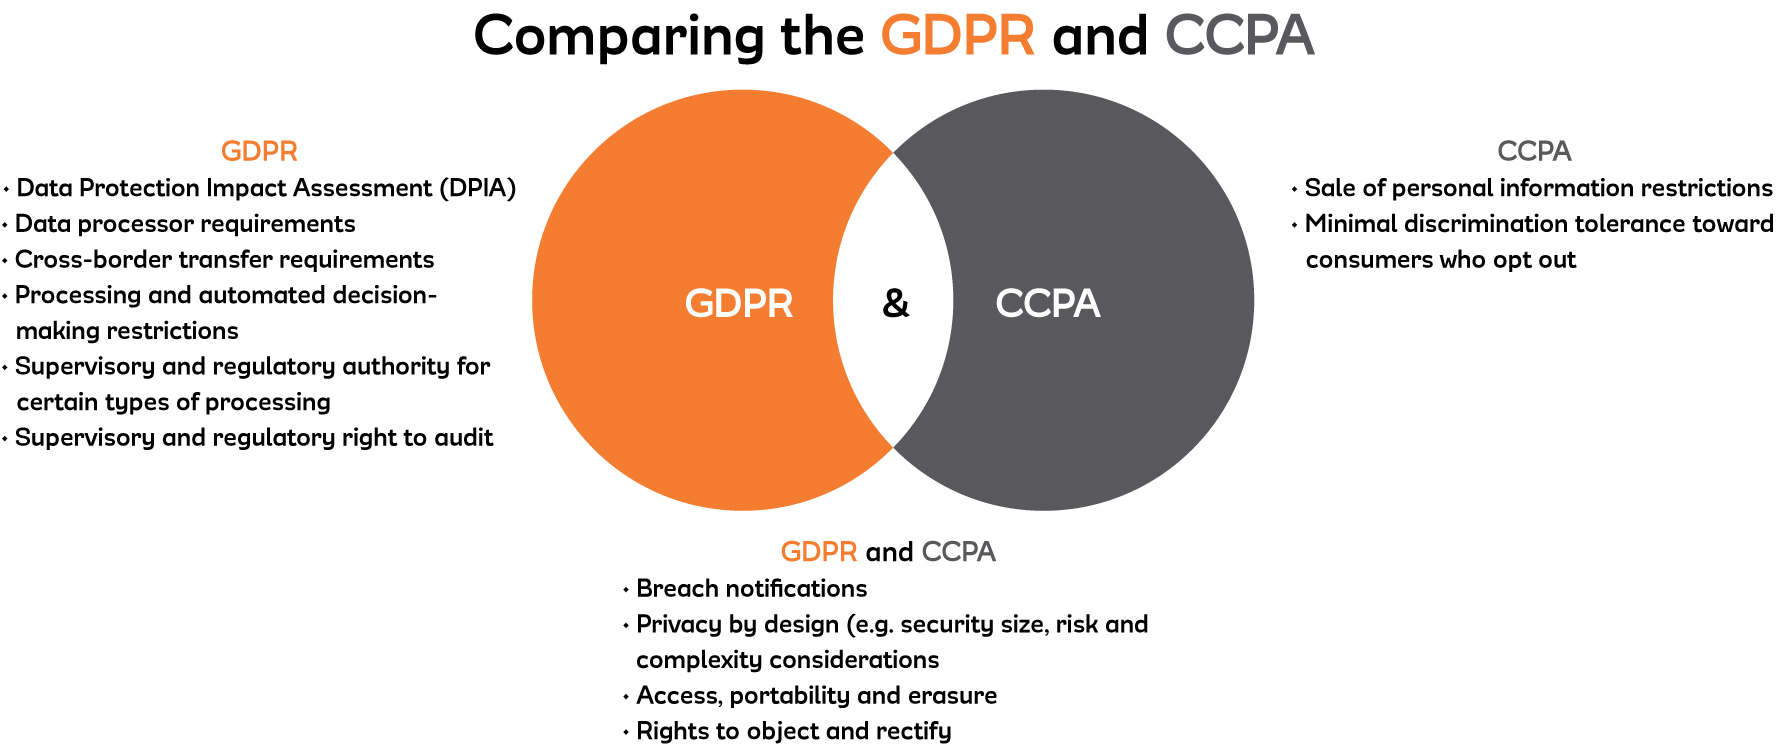 Comparing GDPR and CCPA